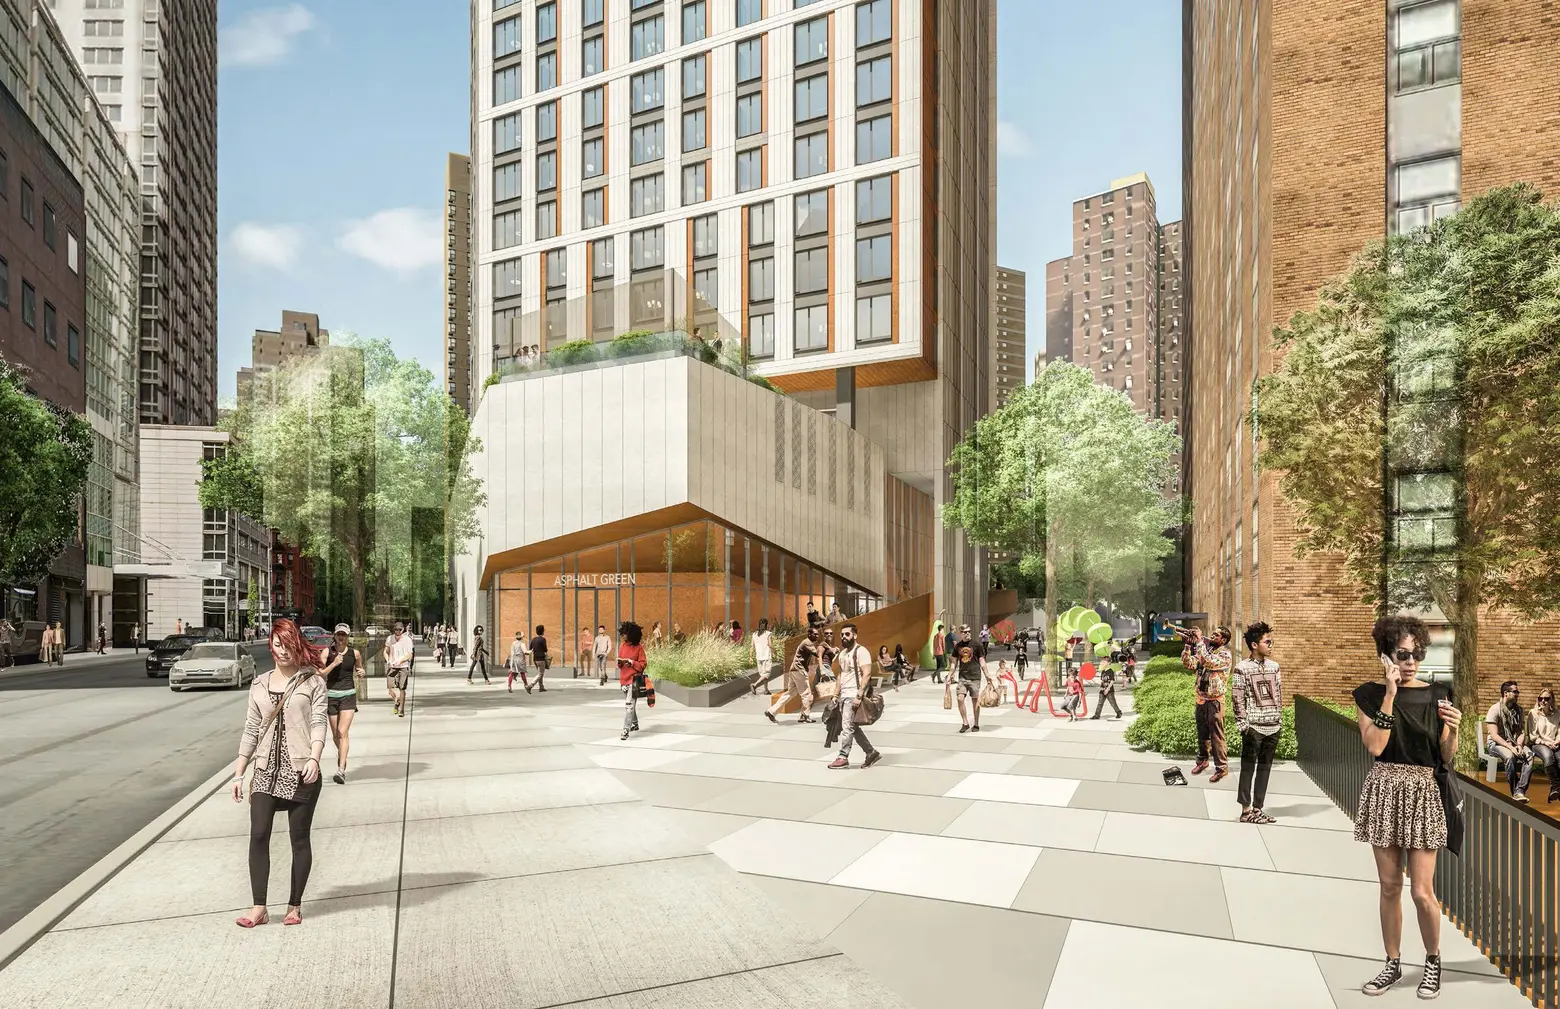 City withdraws plan for mixed-income tower proposed for Upper East Side playground